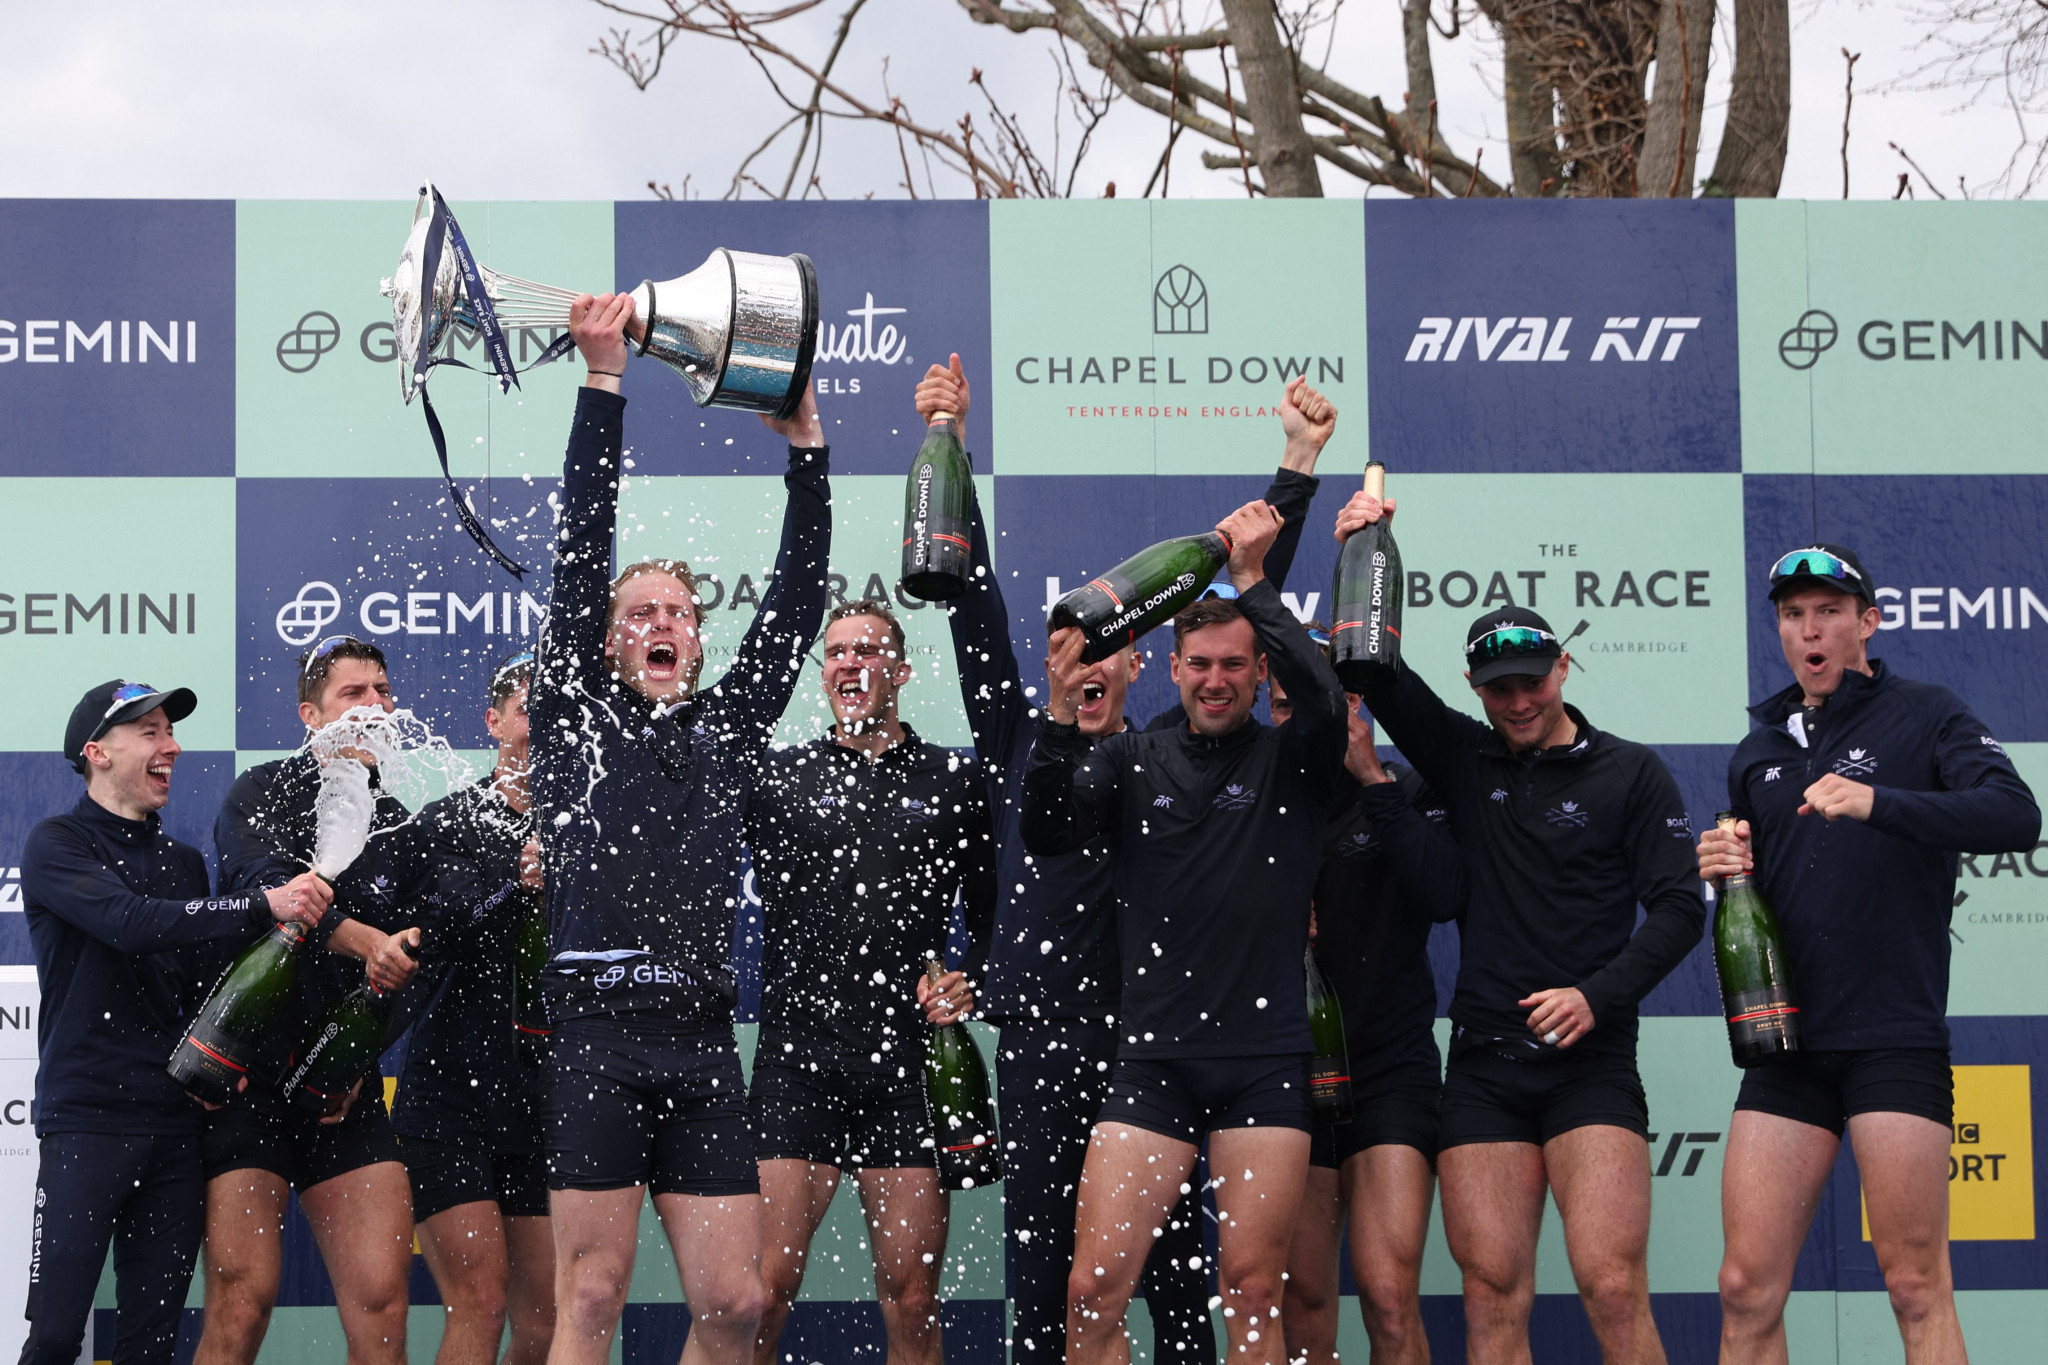 University Boat Races return to London with Cambridge and Oxford winning women's and men's events 